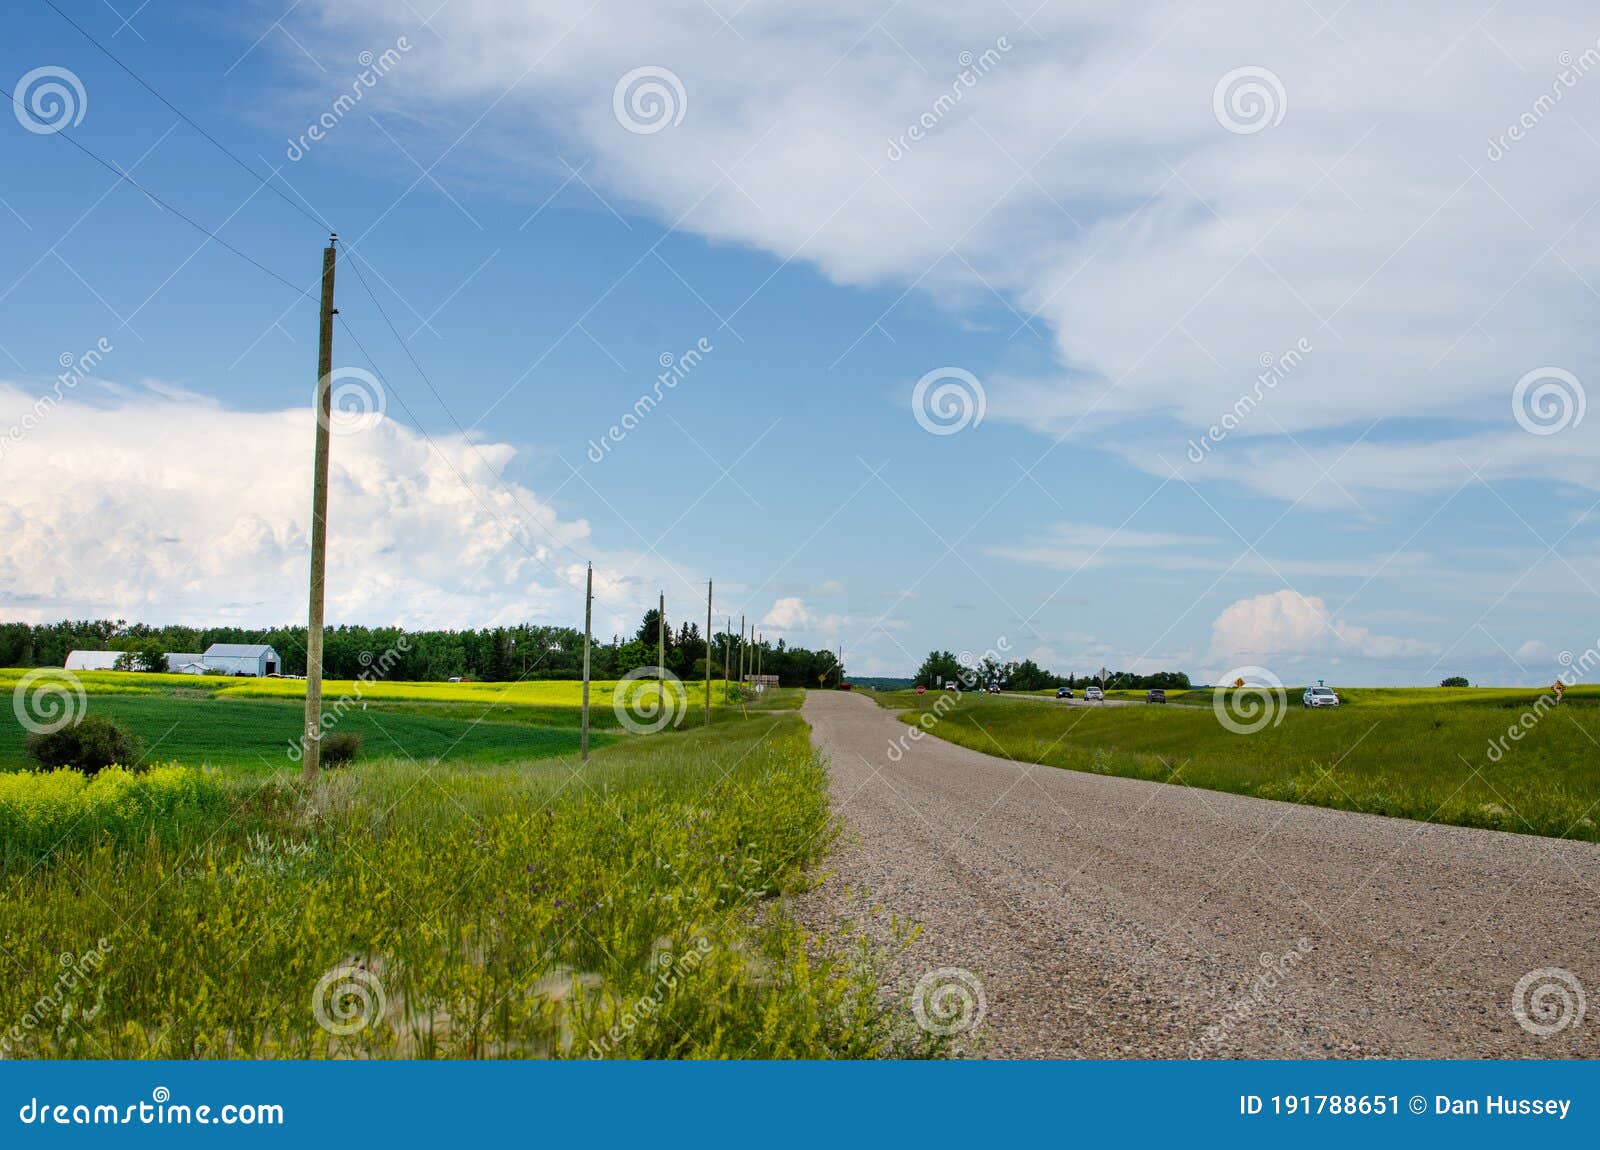 country roads and vibrant yellow canola fields in rural manitoba, canada